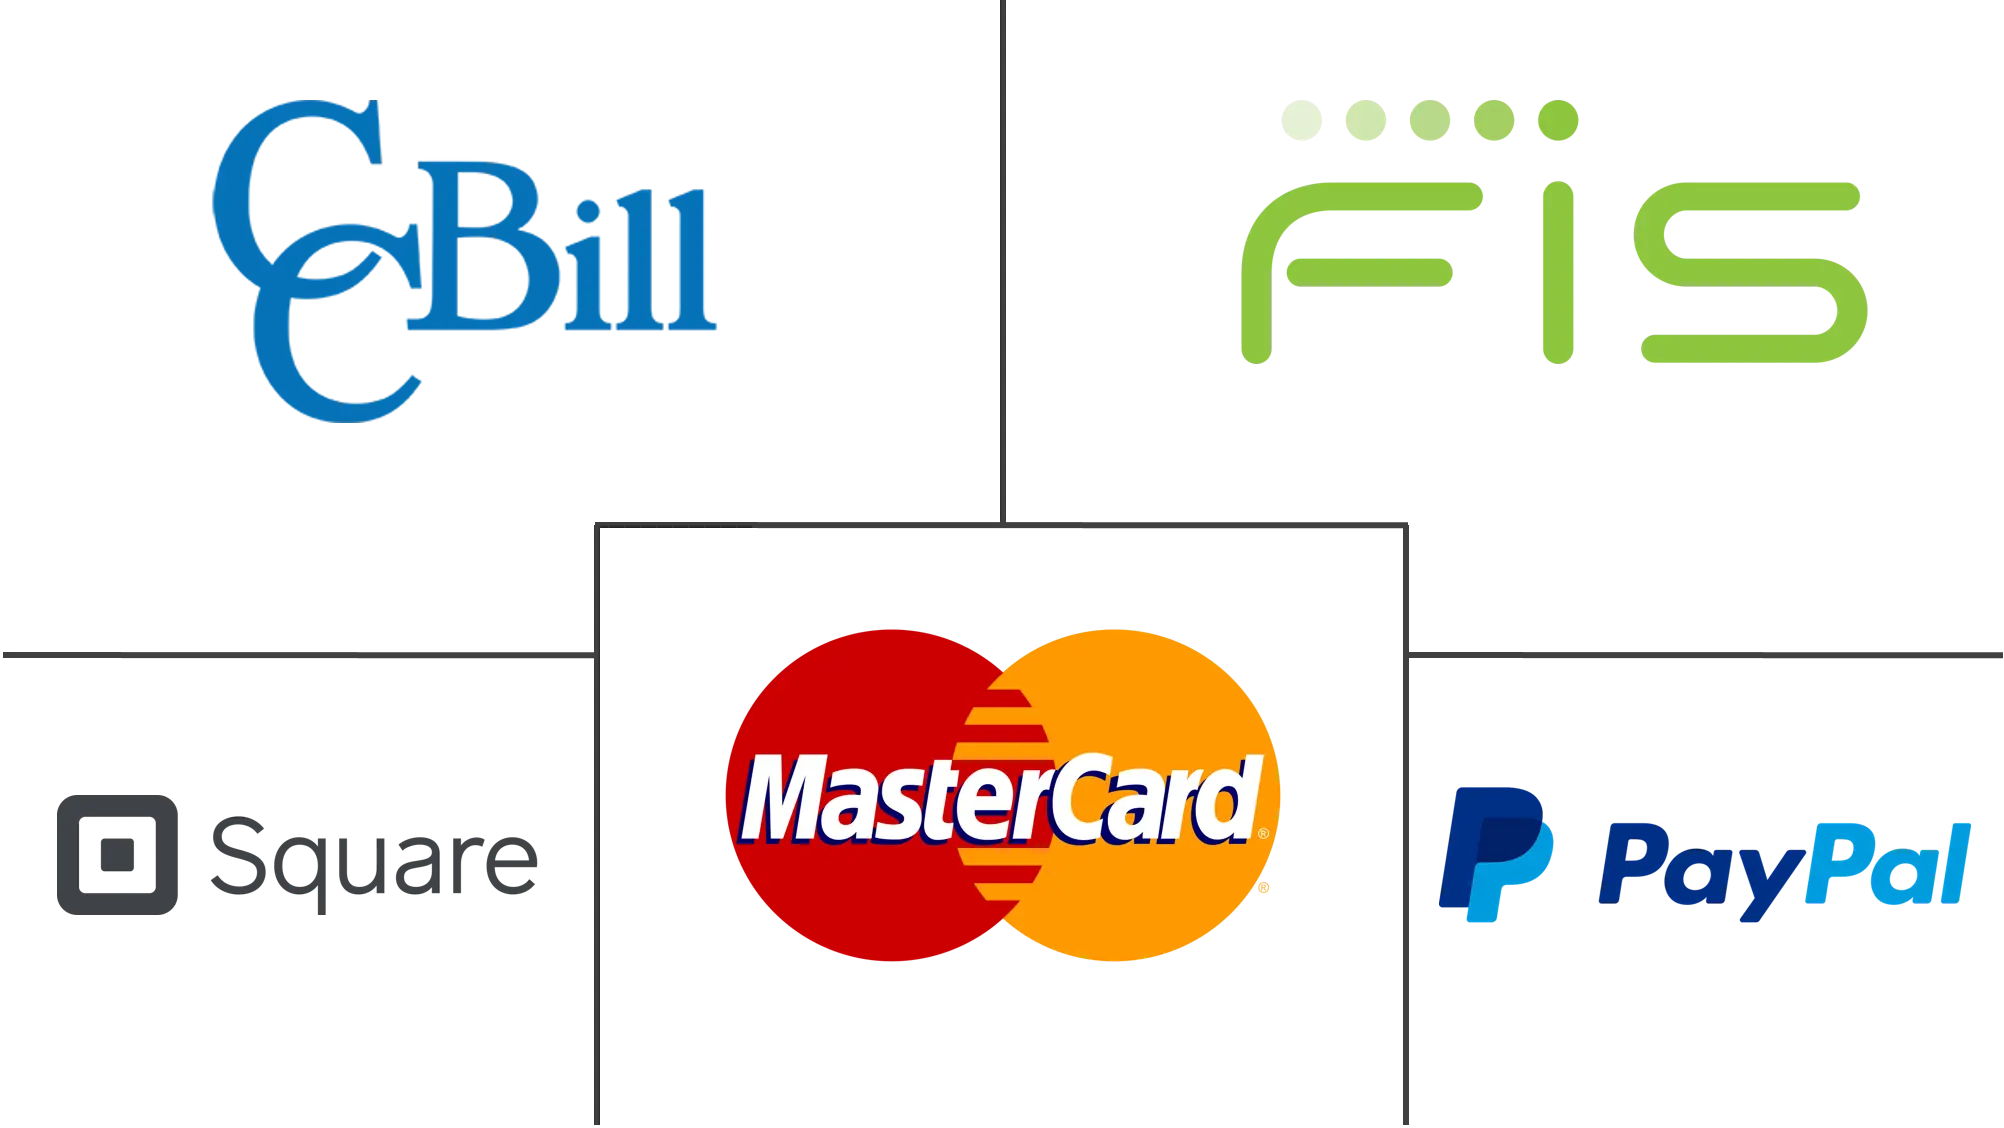 Payment Processing Solutions Market Major Players